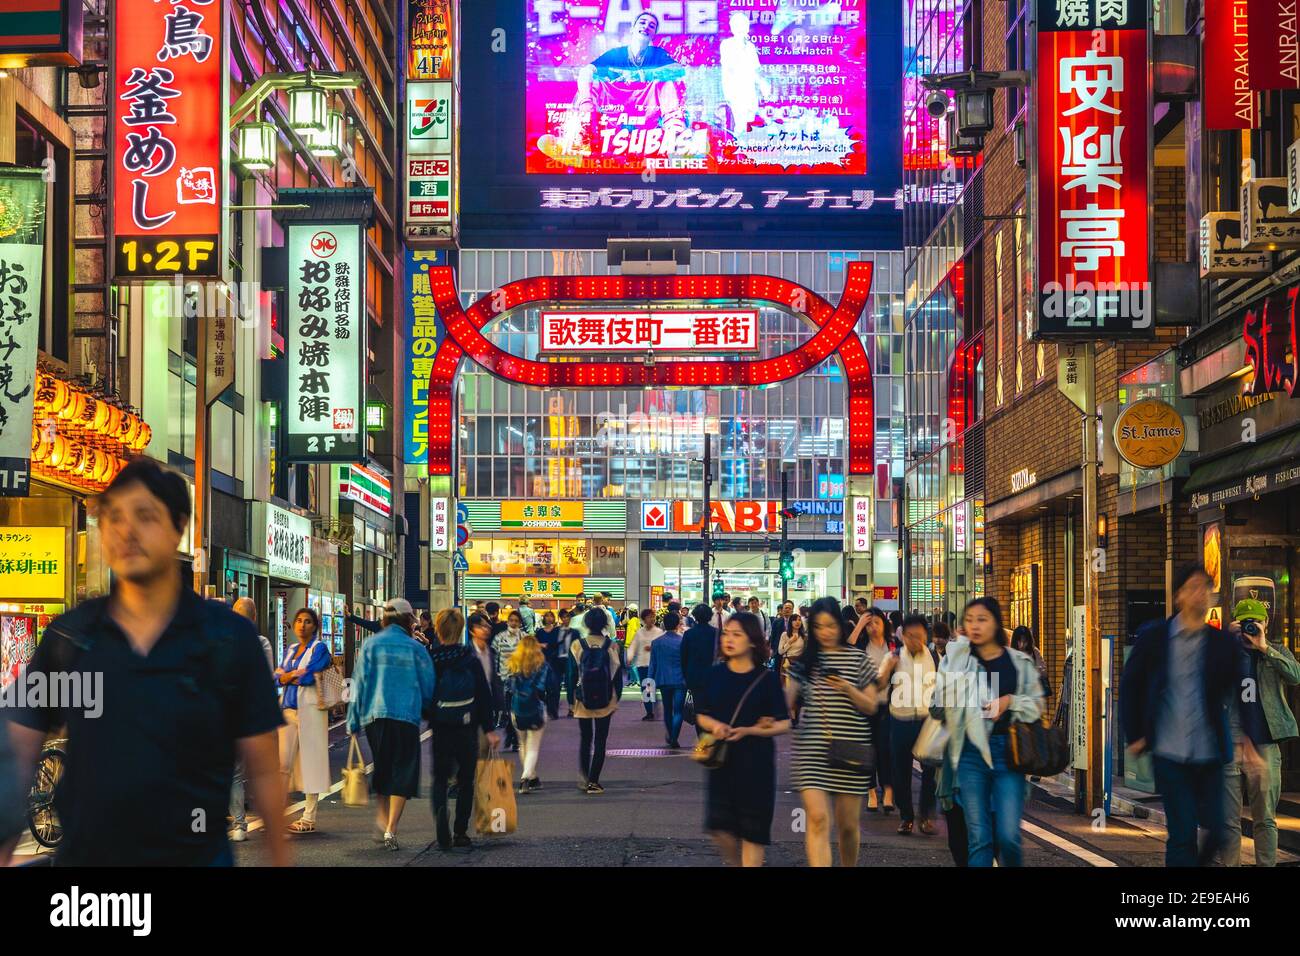 June 11, 2019: Kabukicho, a sleepless town, also the red light district located in Shinjuku, Tokyo, Japan. The name Kabukicho comes from late 1940s pl Stock Photo